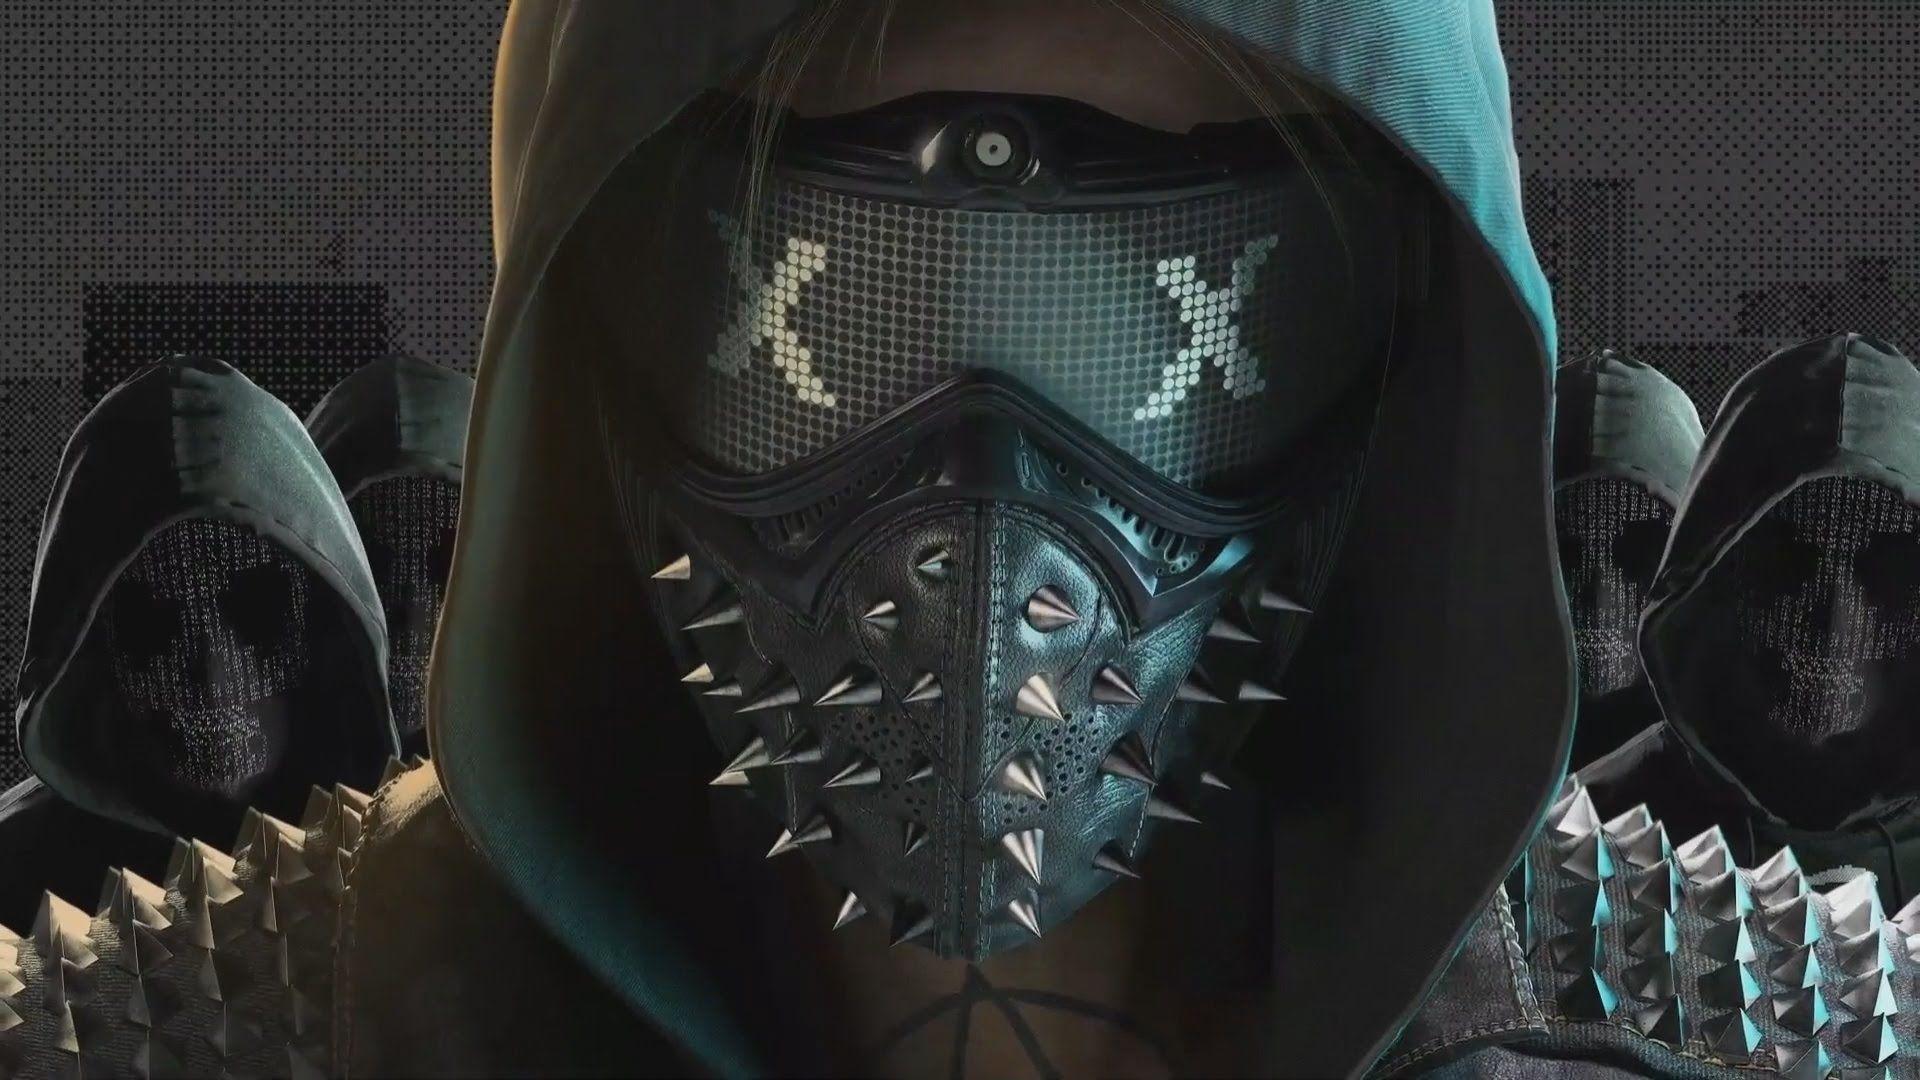 Watch Dogs Legion to Appear During E3 2019